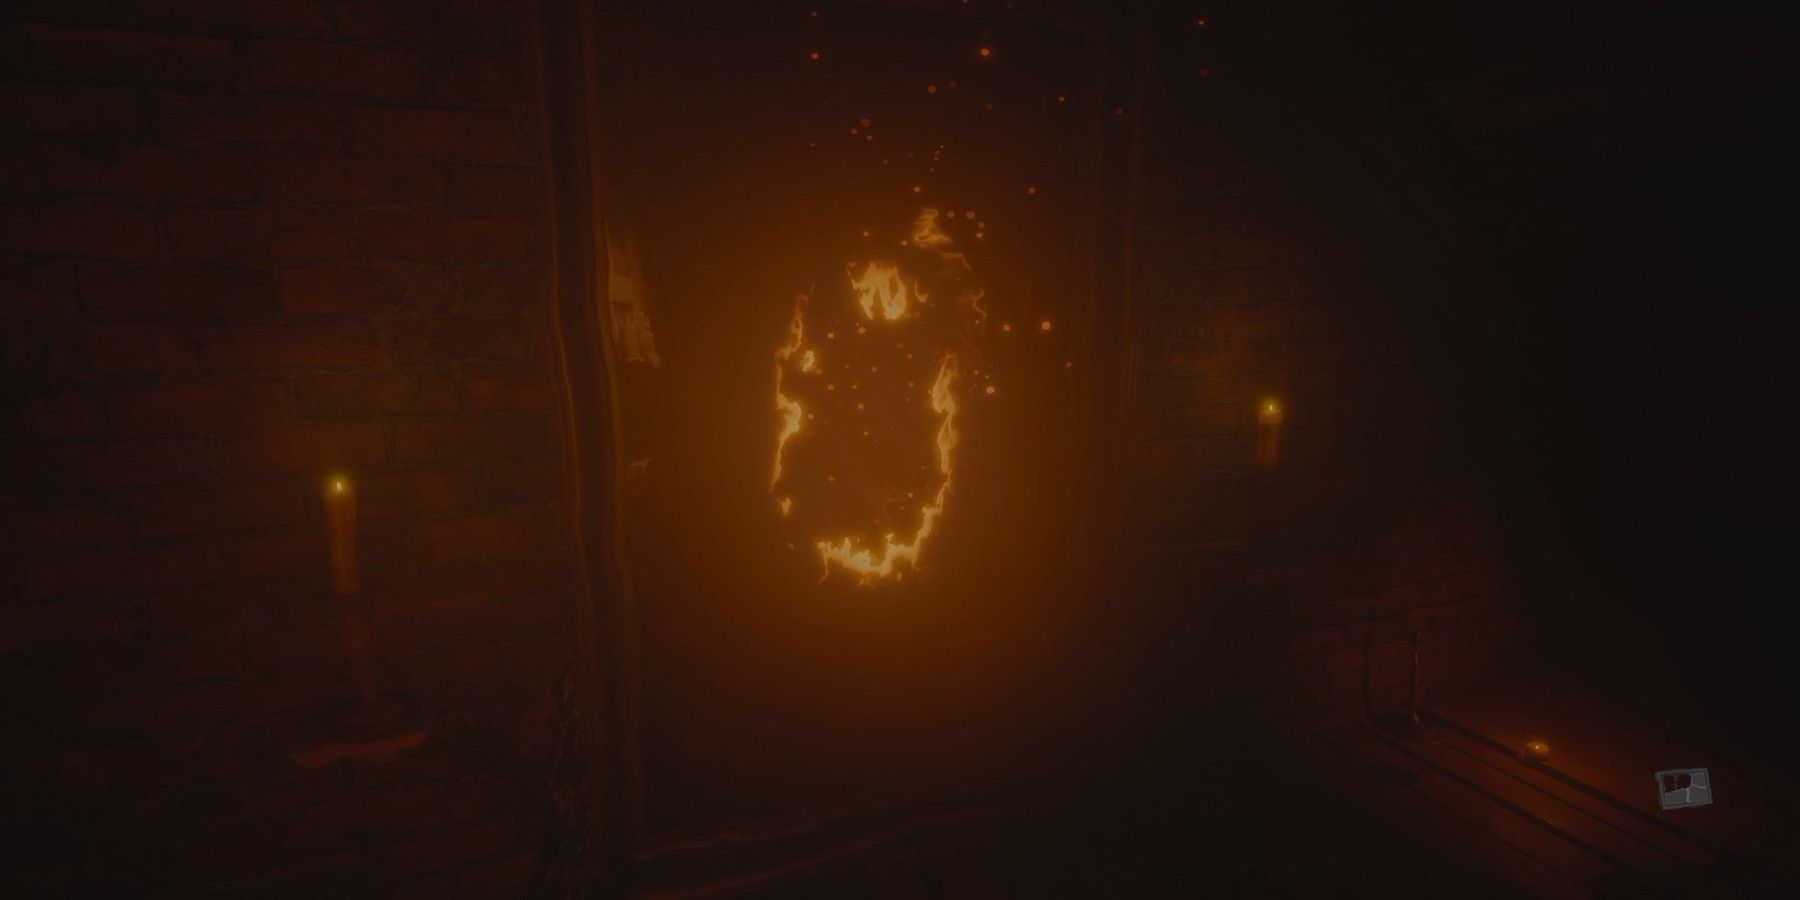 layers of fear - lantern - burning painting 